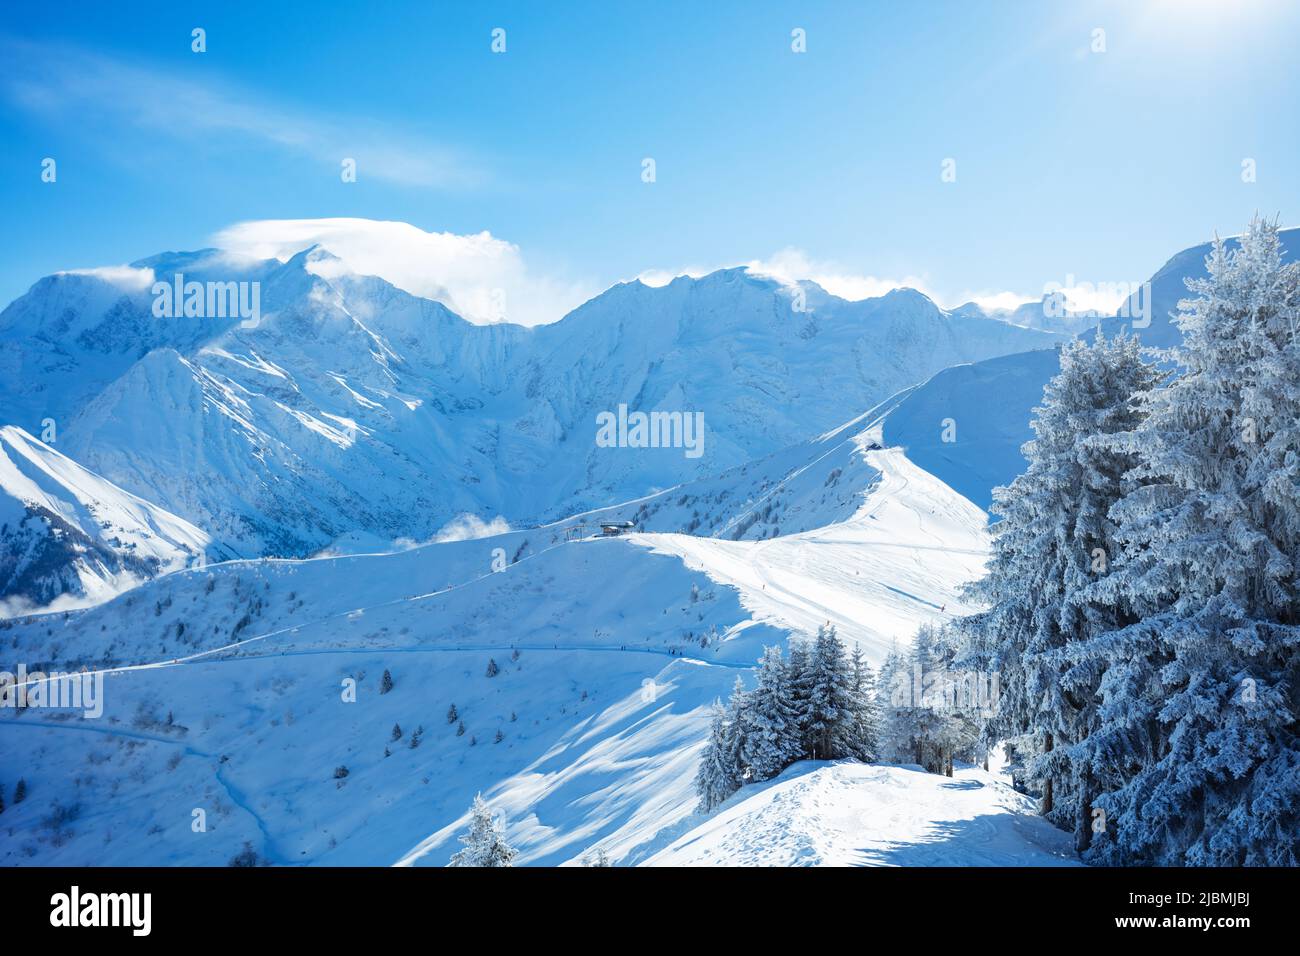 Snow covered fir forest after heavy snowfall over Alps mountains Stock Photo